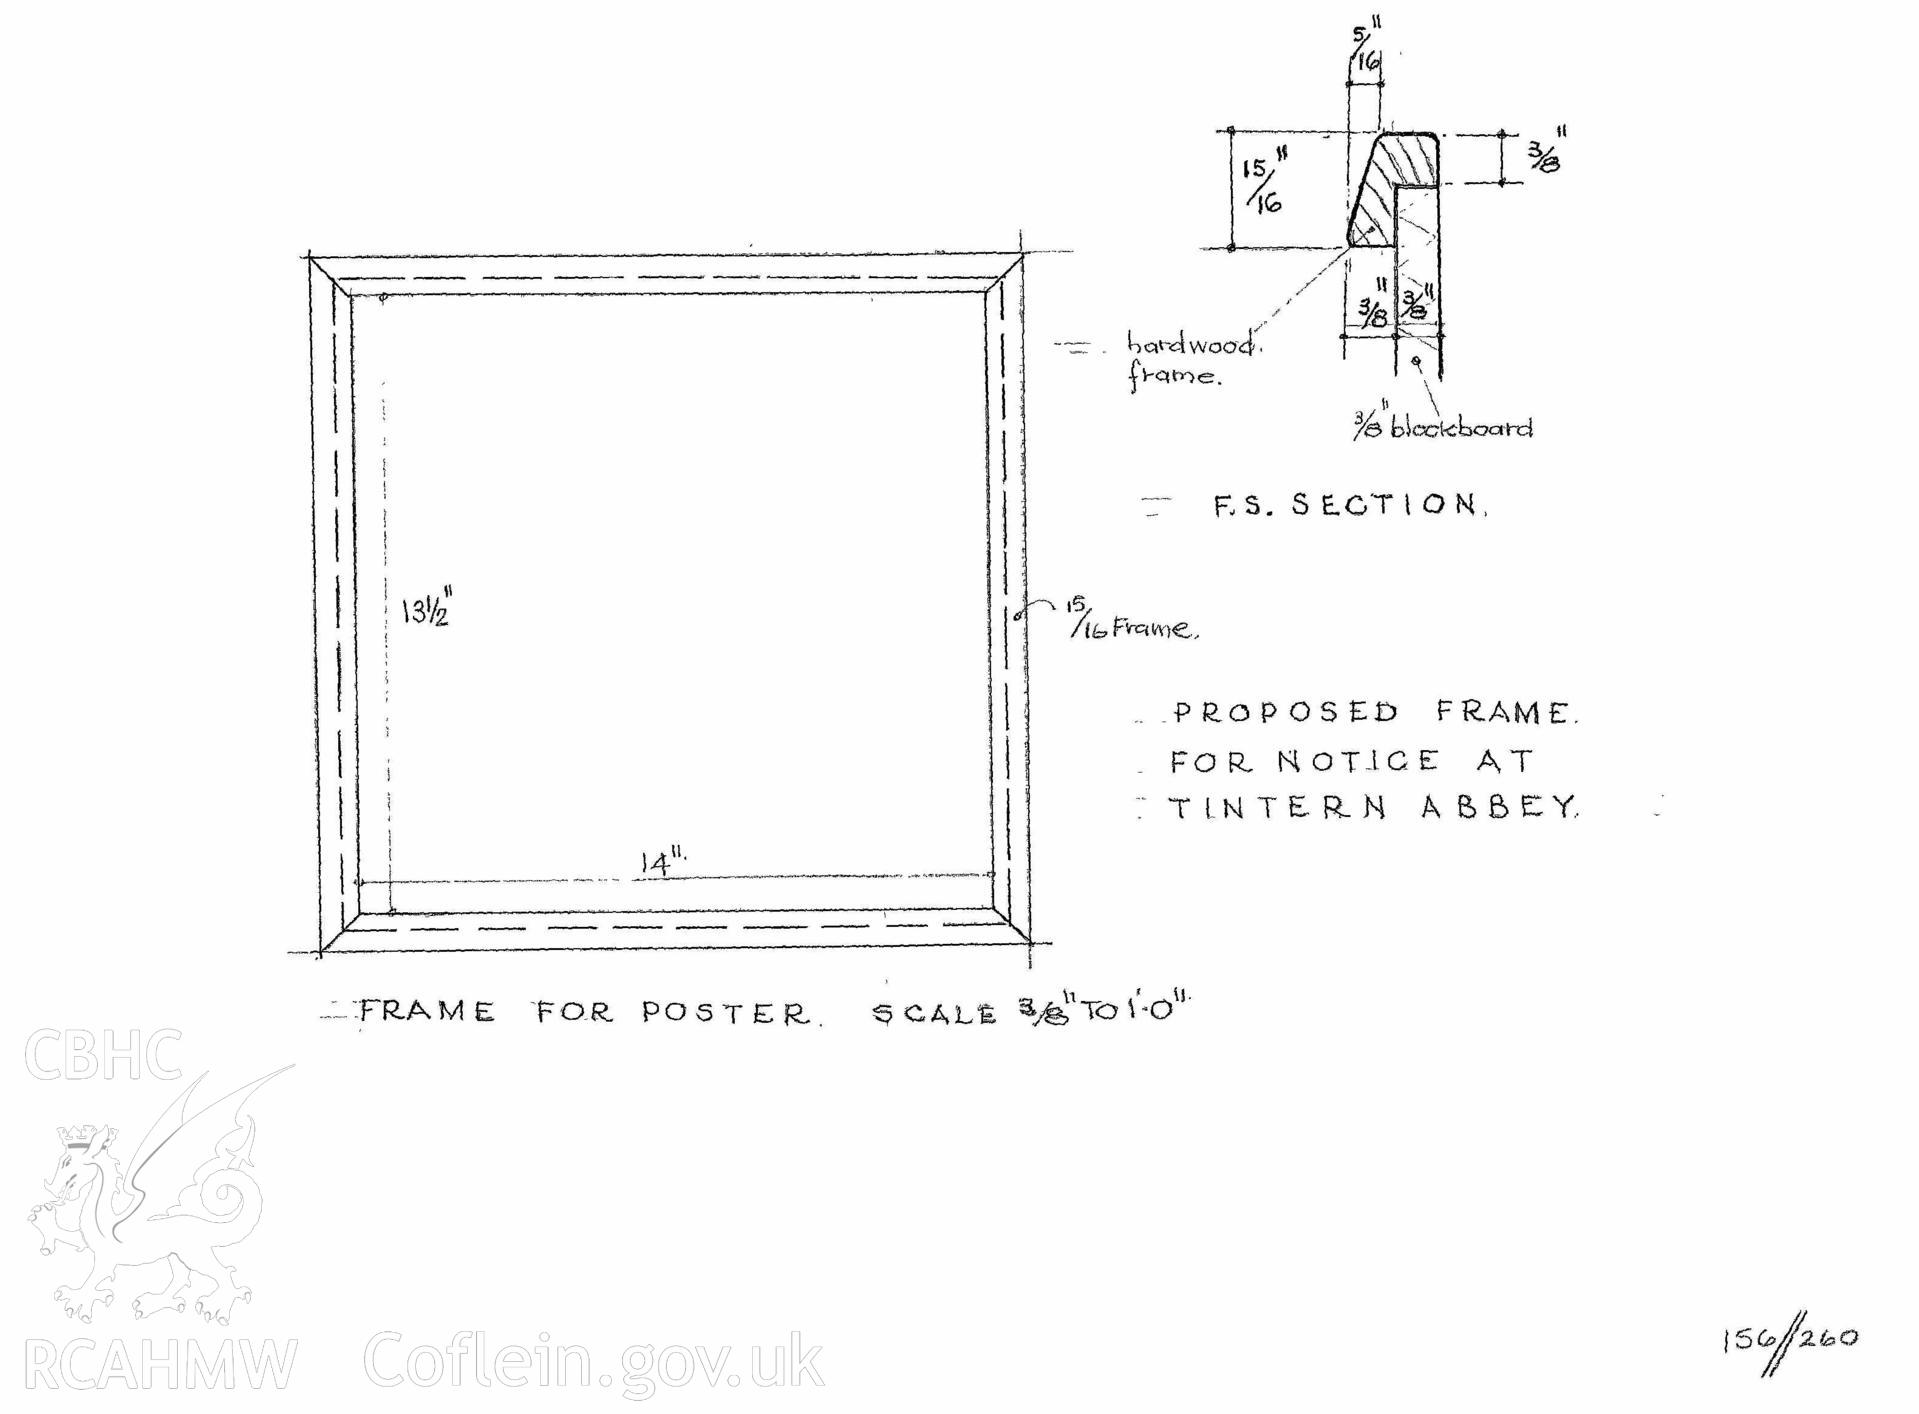 Cadw guardianship monument drawing of Tintern Abbey. Frame for Notice. Cadw ref. No. 156//260. Scale 1:32.